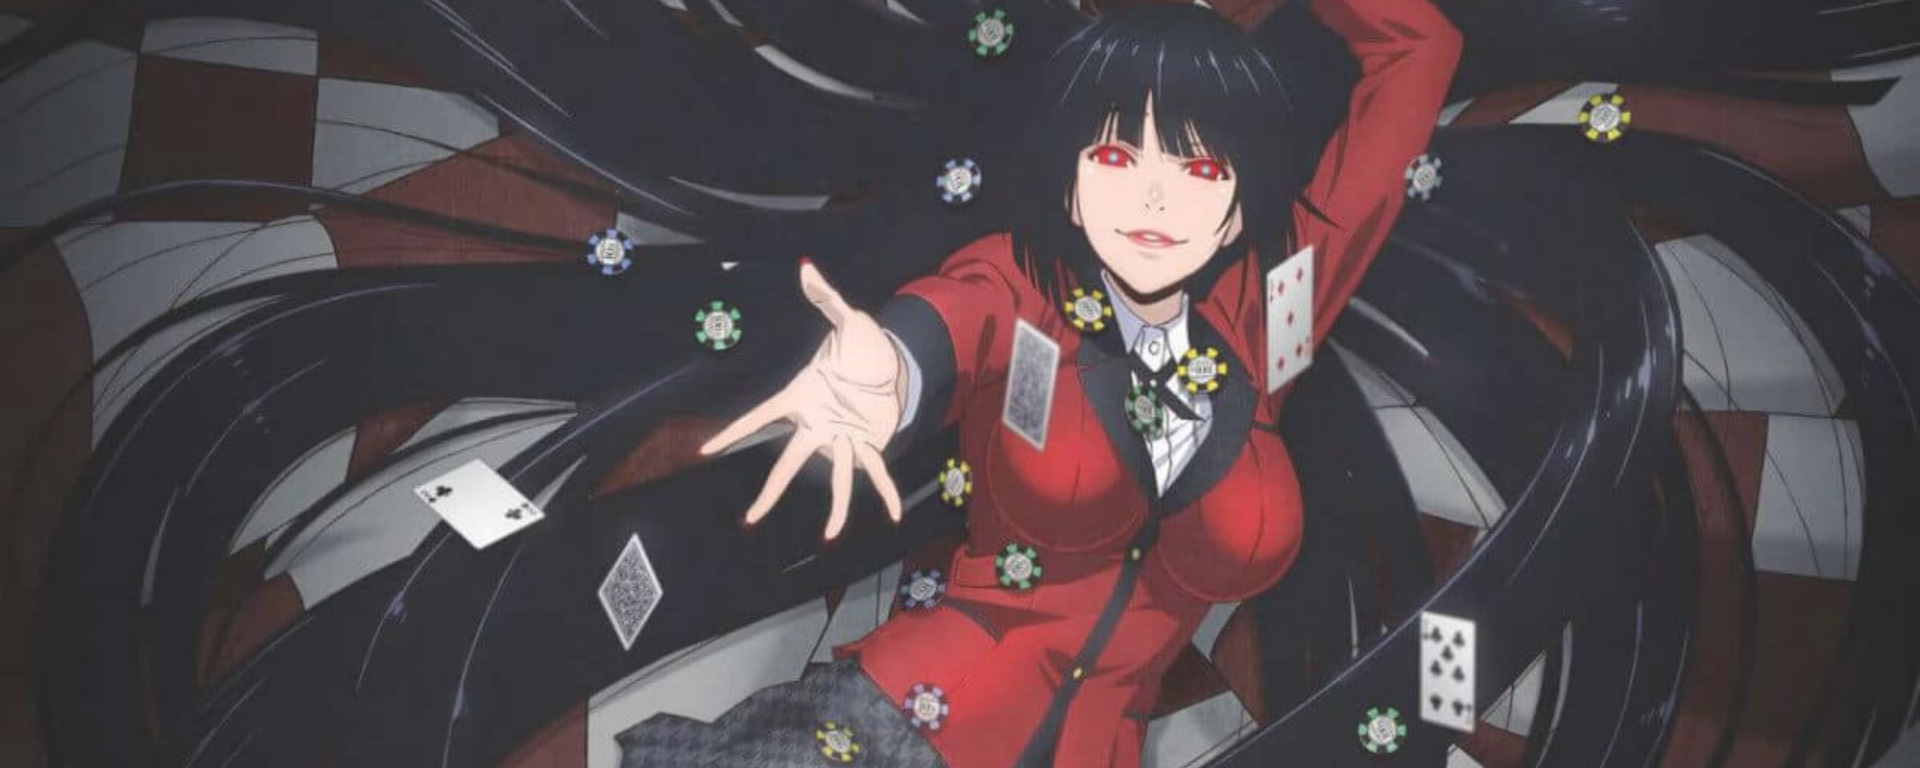 The Over-the-Top Faces of KAKEGURUI TWIN